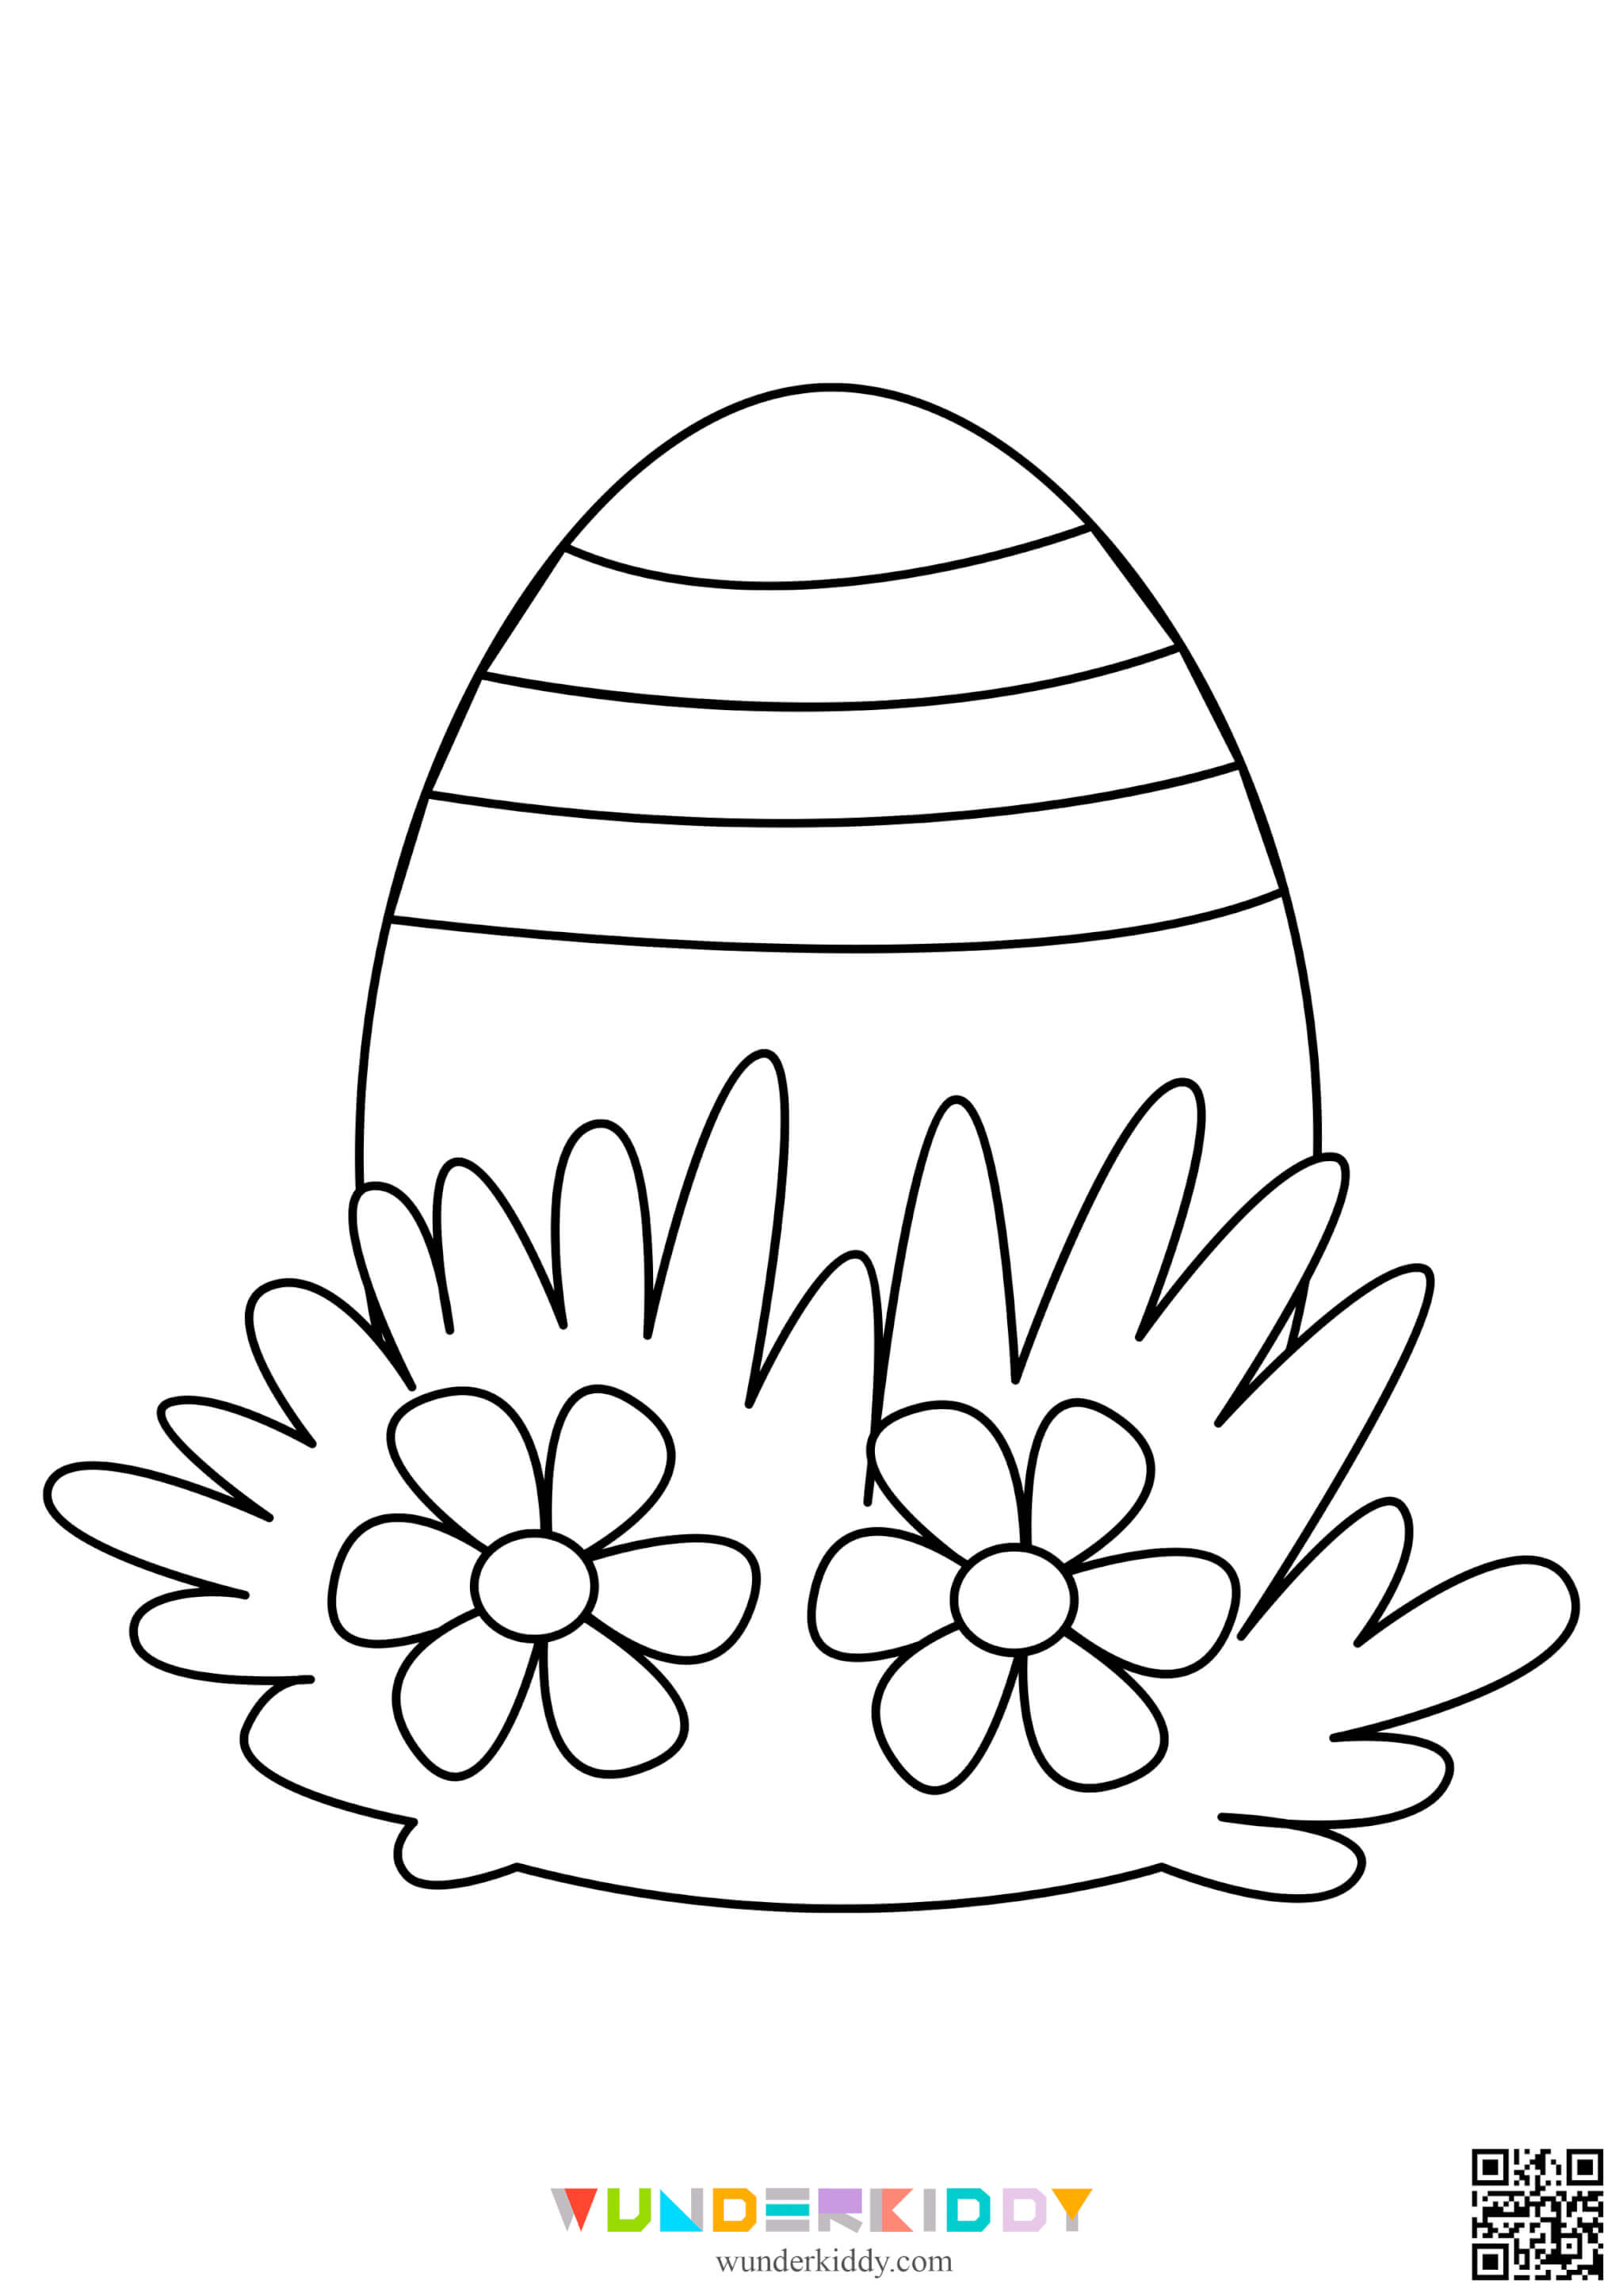 Easter Eggs Coloring Pages - Image 6